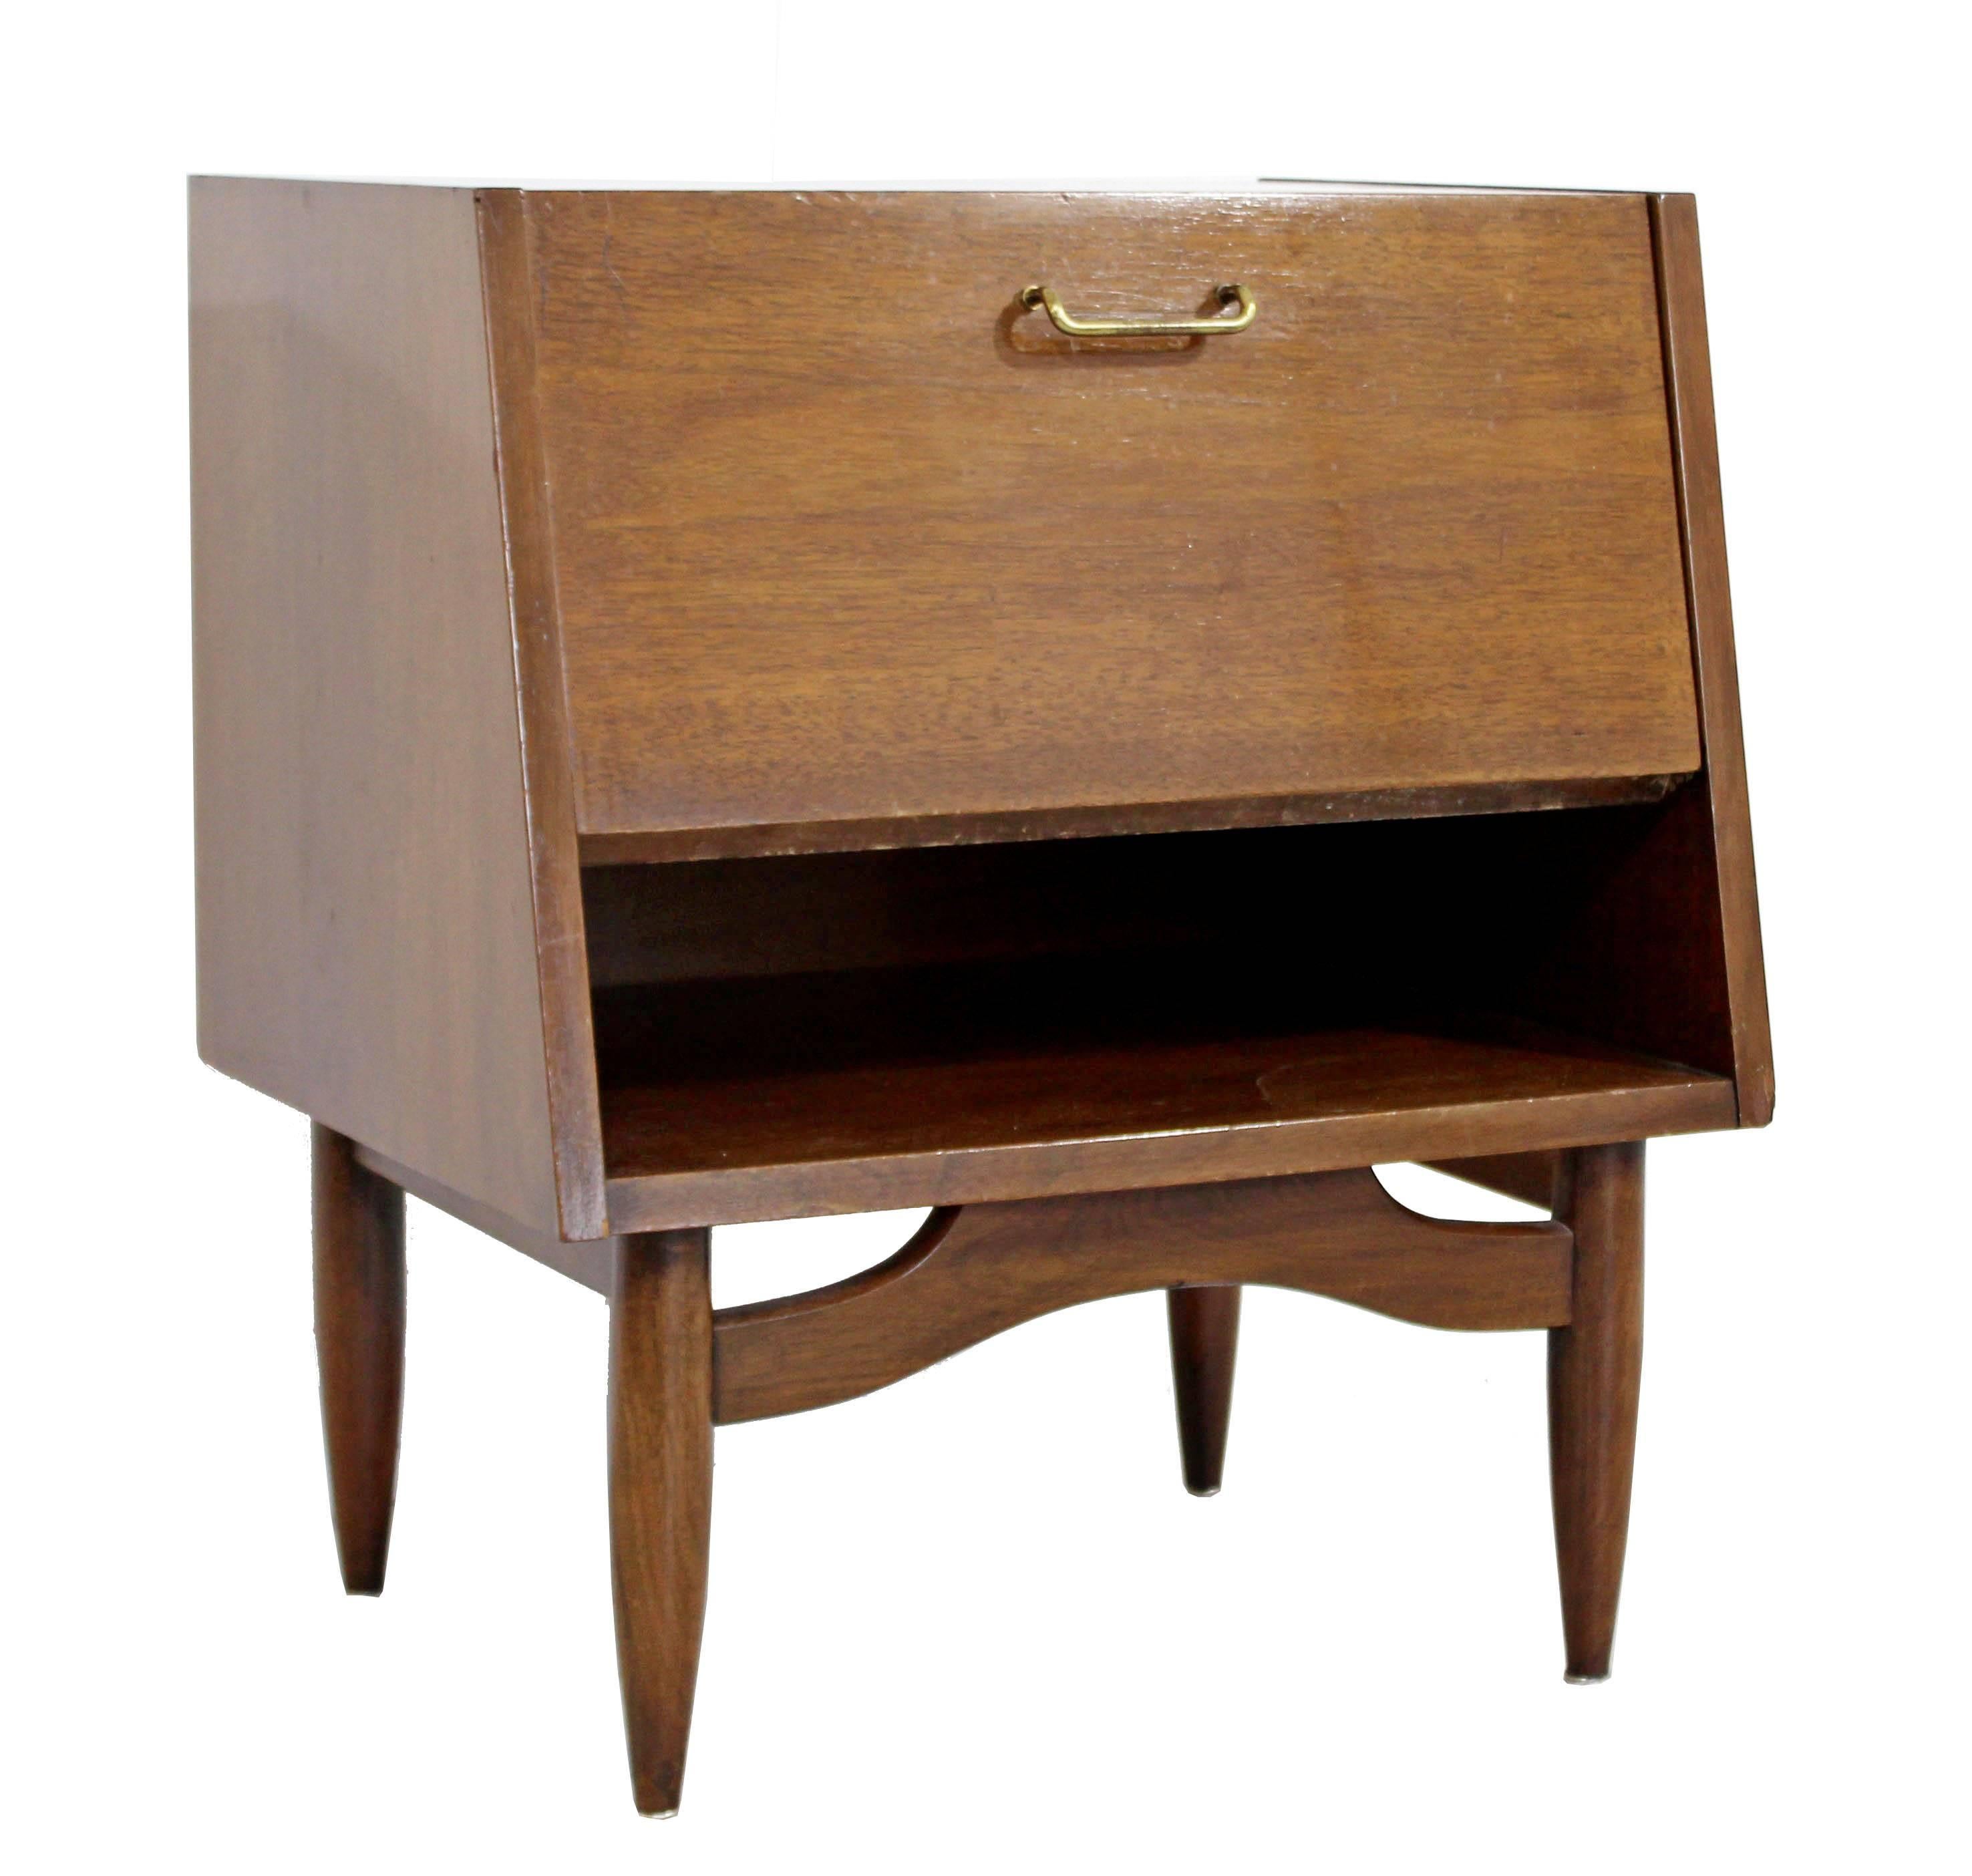 For your consideration is a sweet, little, walnut nightstand, with brass accents, by Merton Gershun for American of Martinsville, the Dania collection, circa the 1970s. In excellent condition. The dimensions are 22